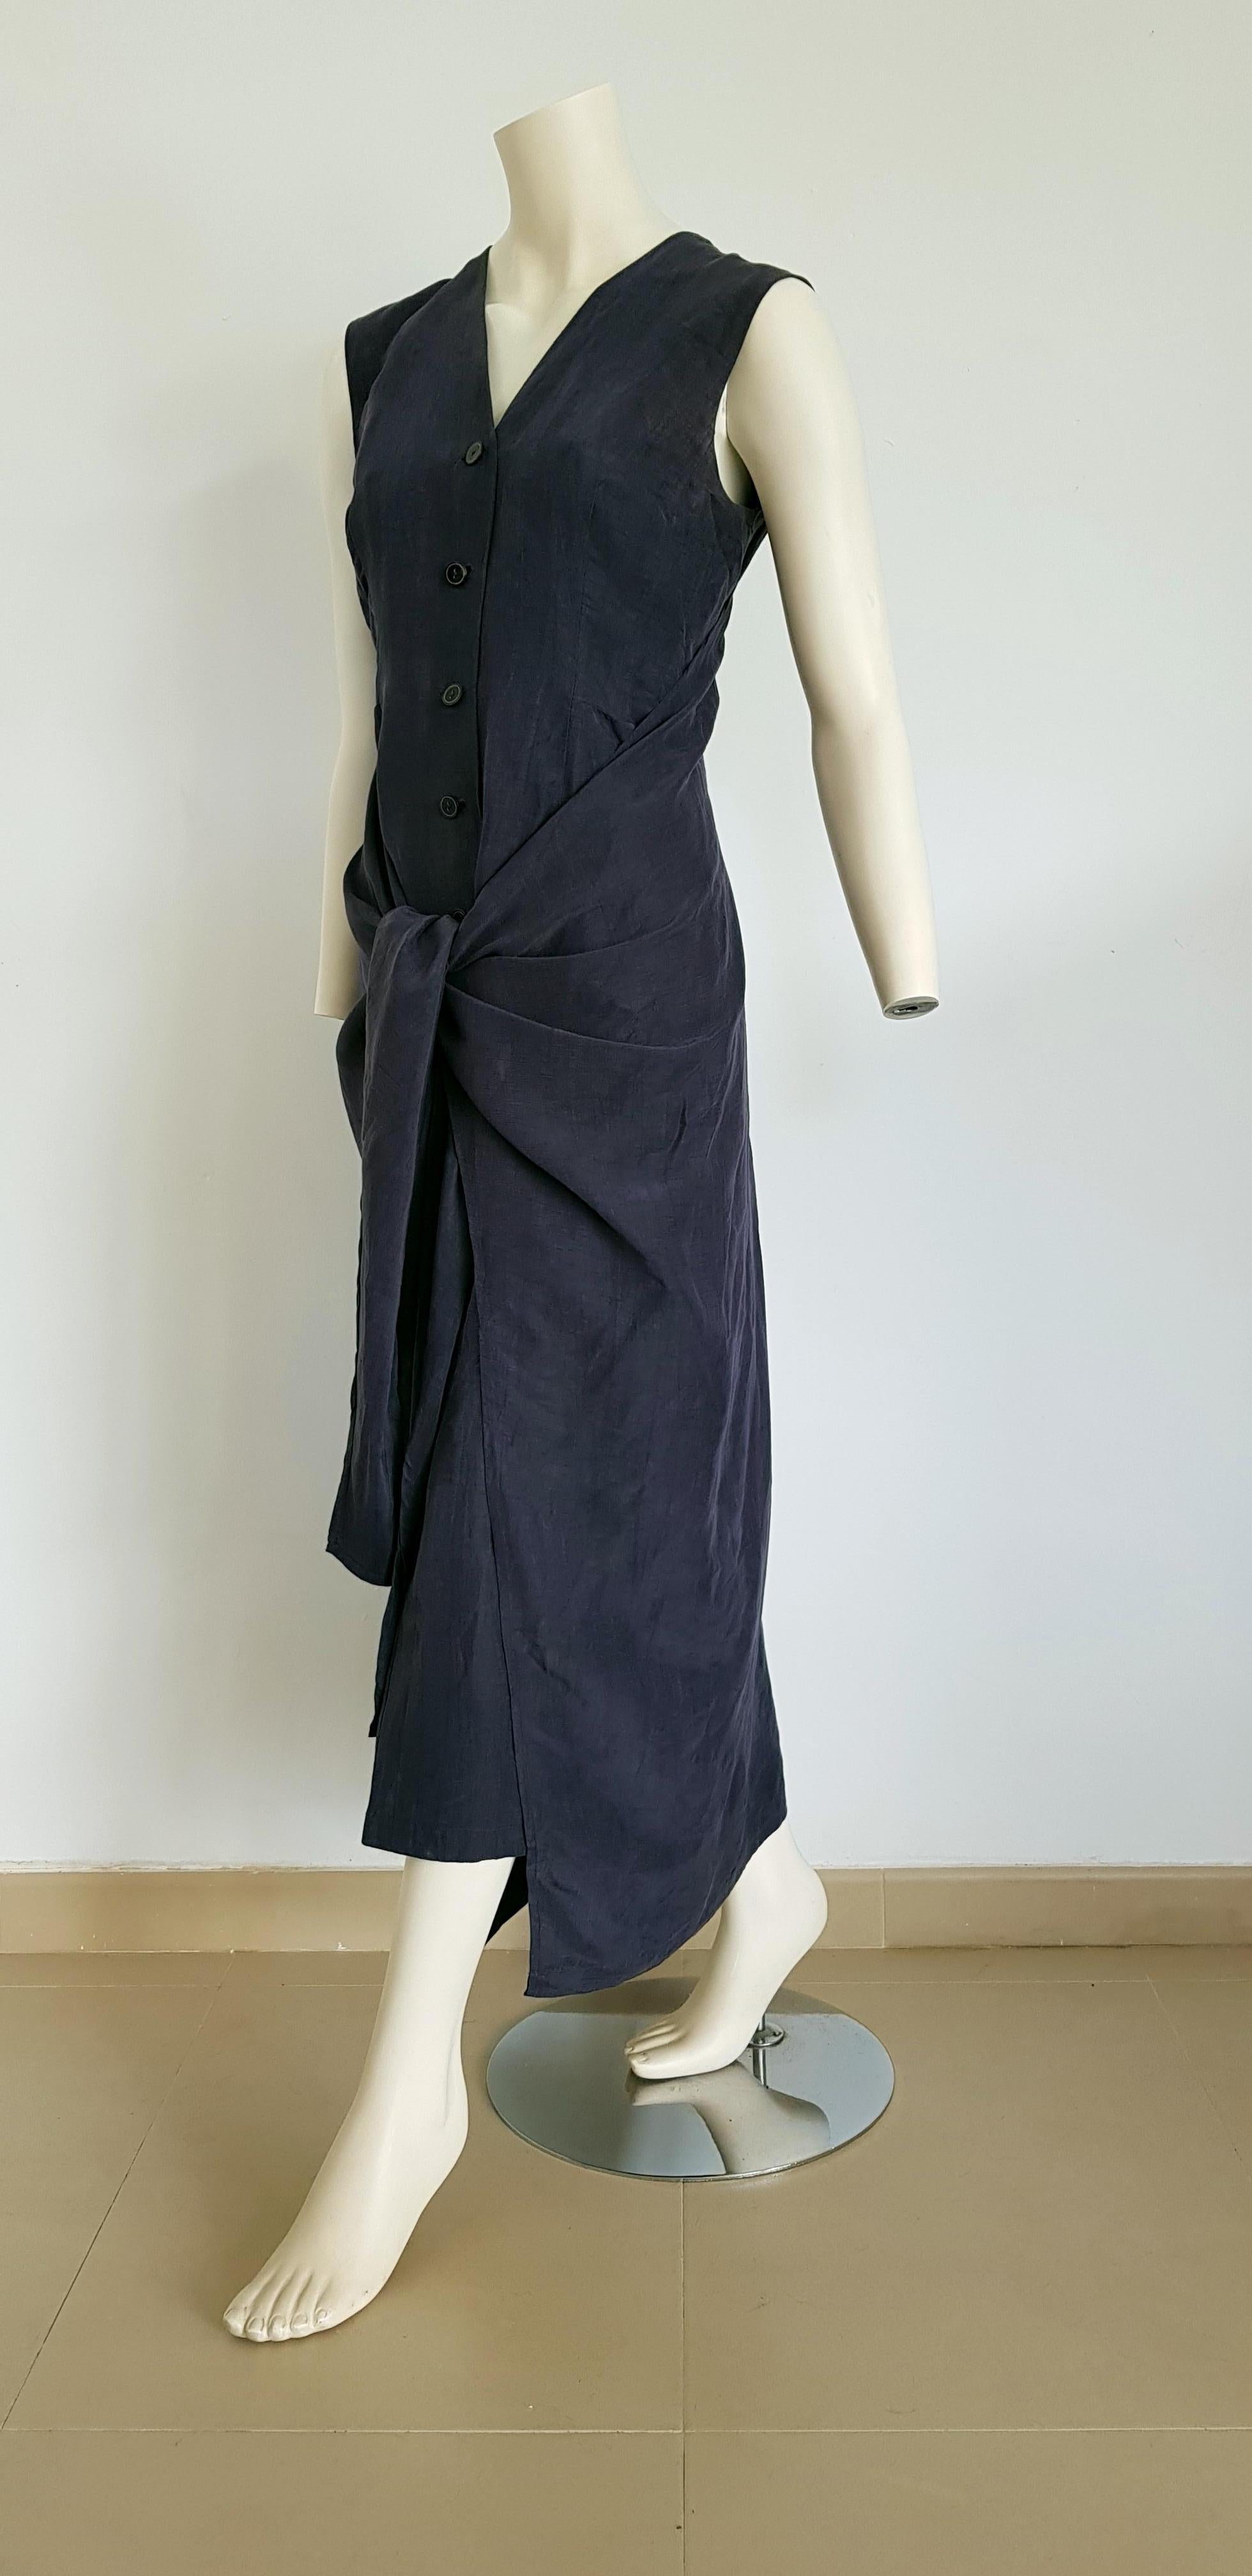 JIL SANDER blue silk linen dress, with bow front or back - Unworn, New.

SIZE: equivalent to about Small / Medium, please review approx measurements as follows in cm: lenght 133, chest underarm to underarm 46, bust circumference 90, shoulder from